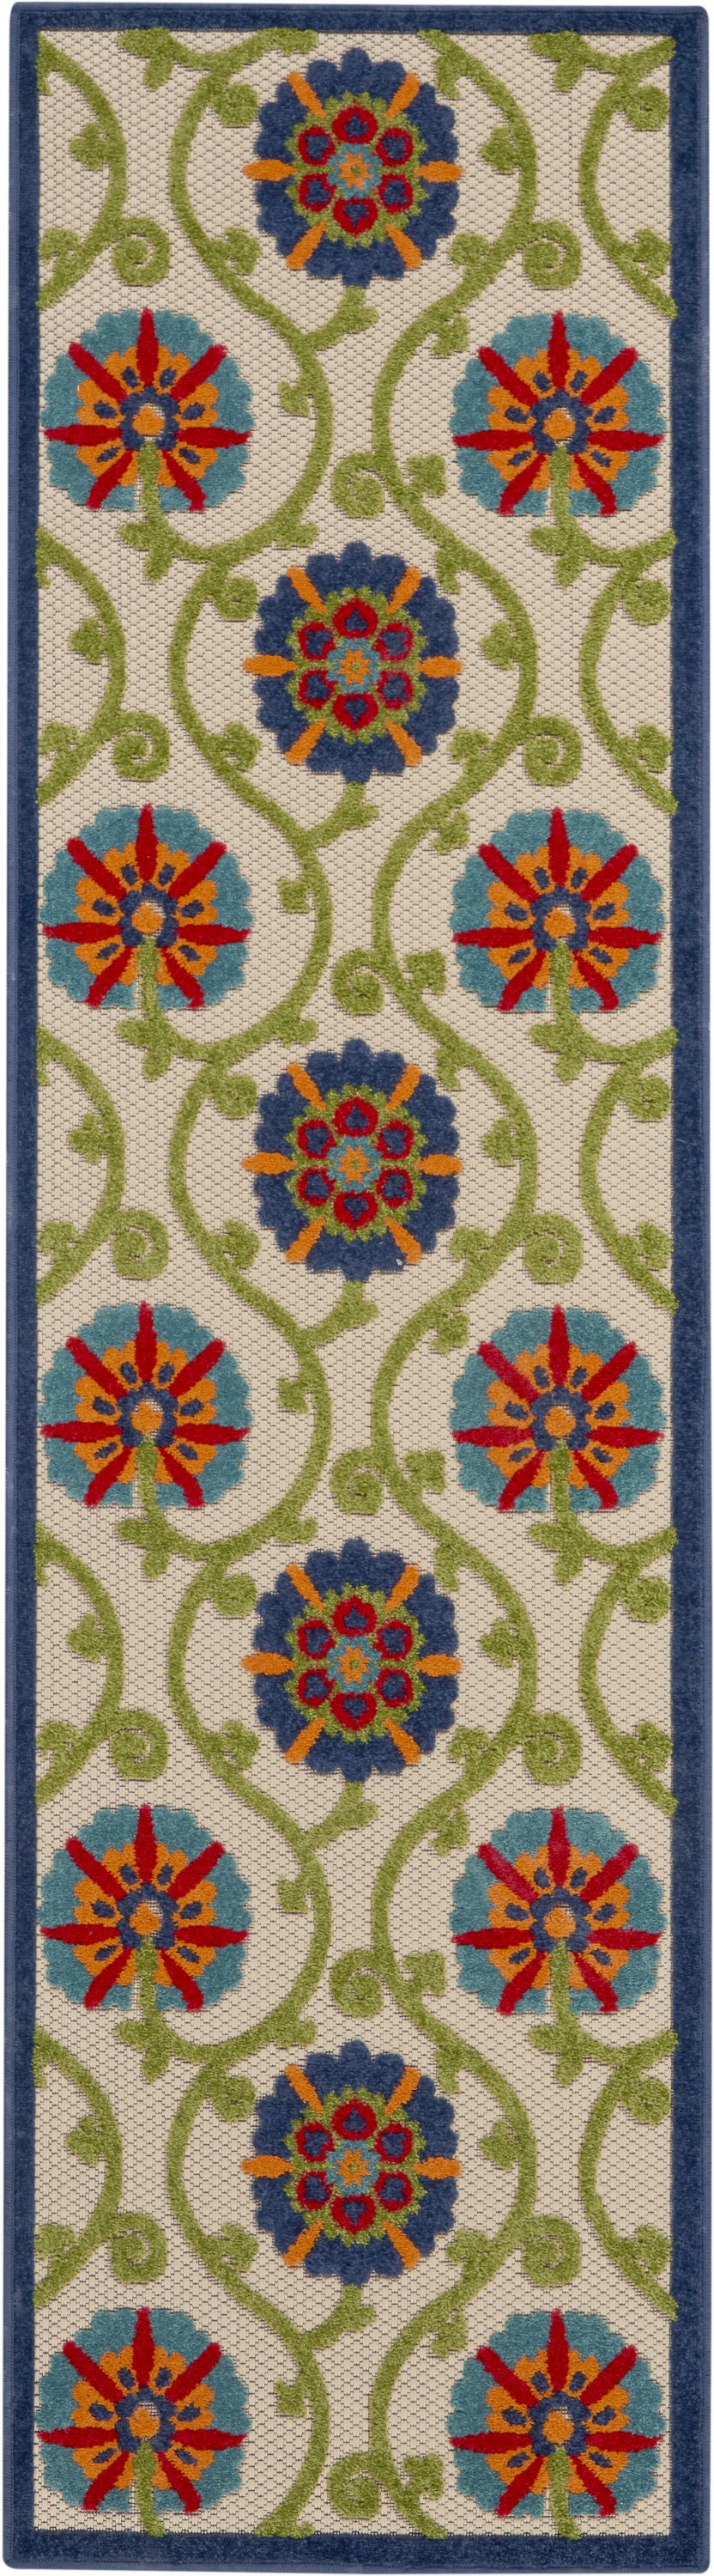 2' X 10' Ivory And Blue Floral Indoor Outdoor Area Rug-384969-1